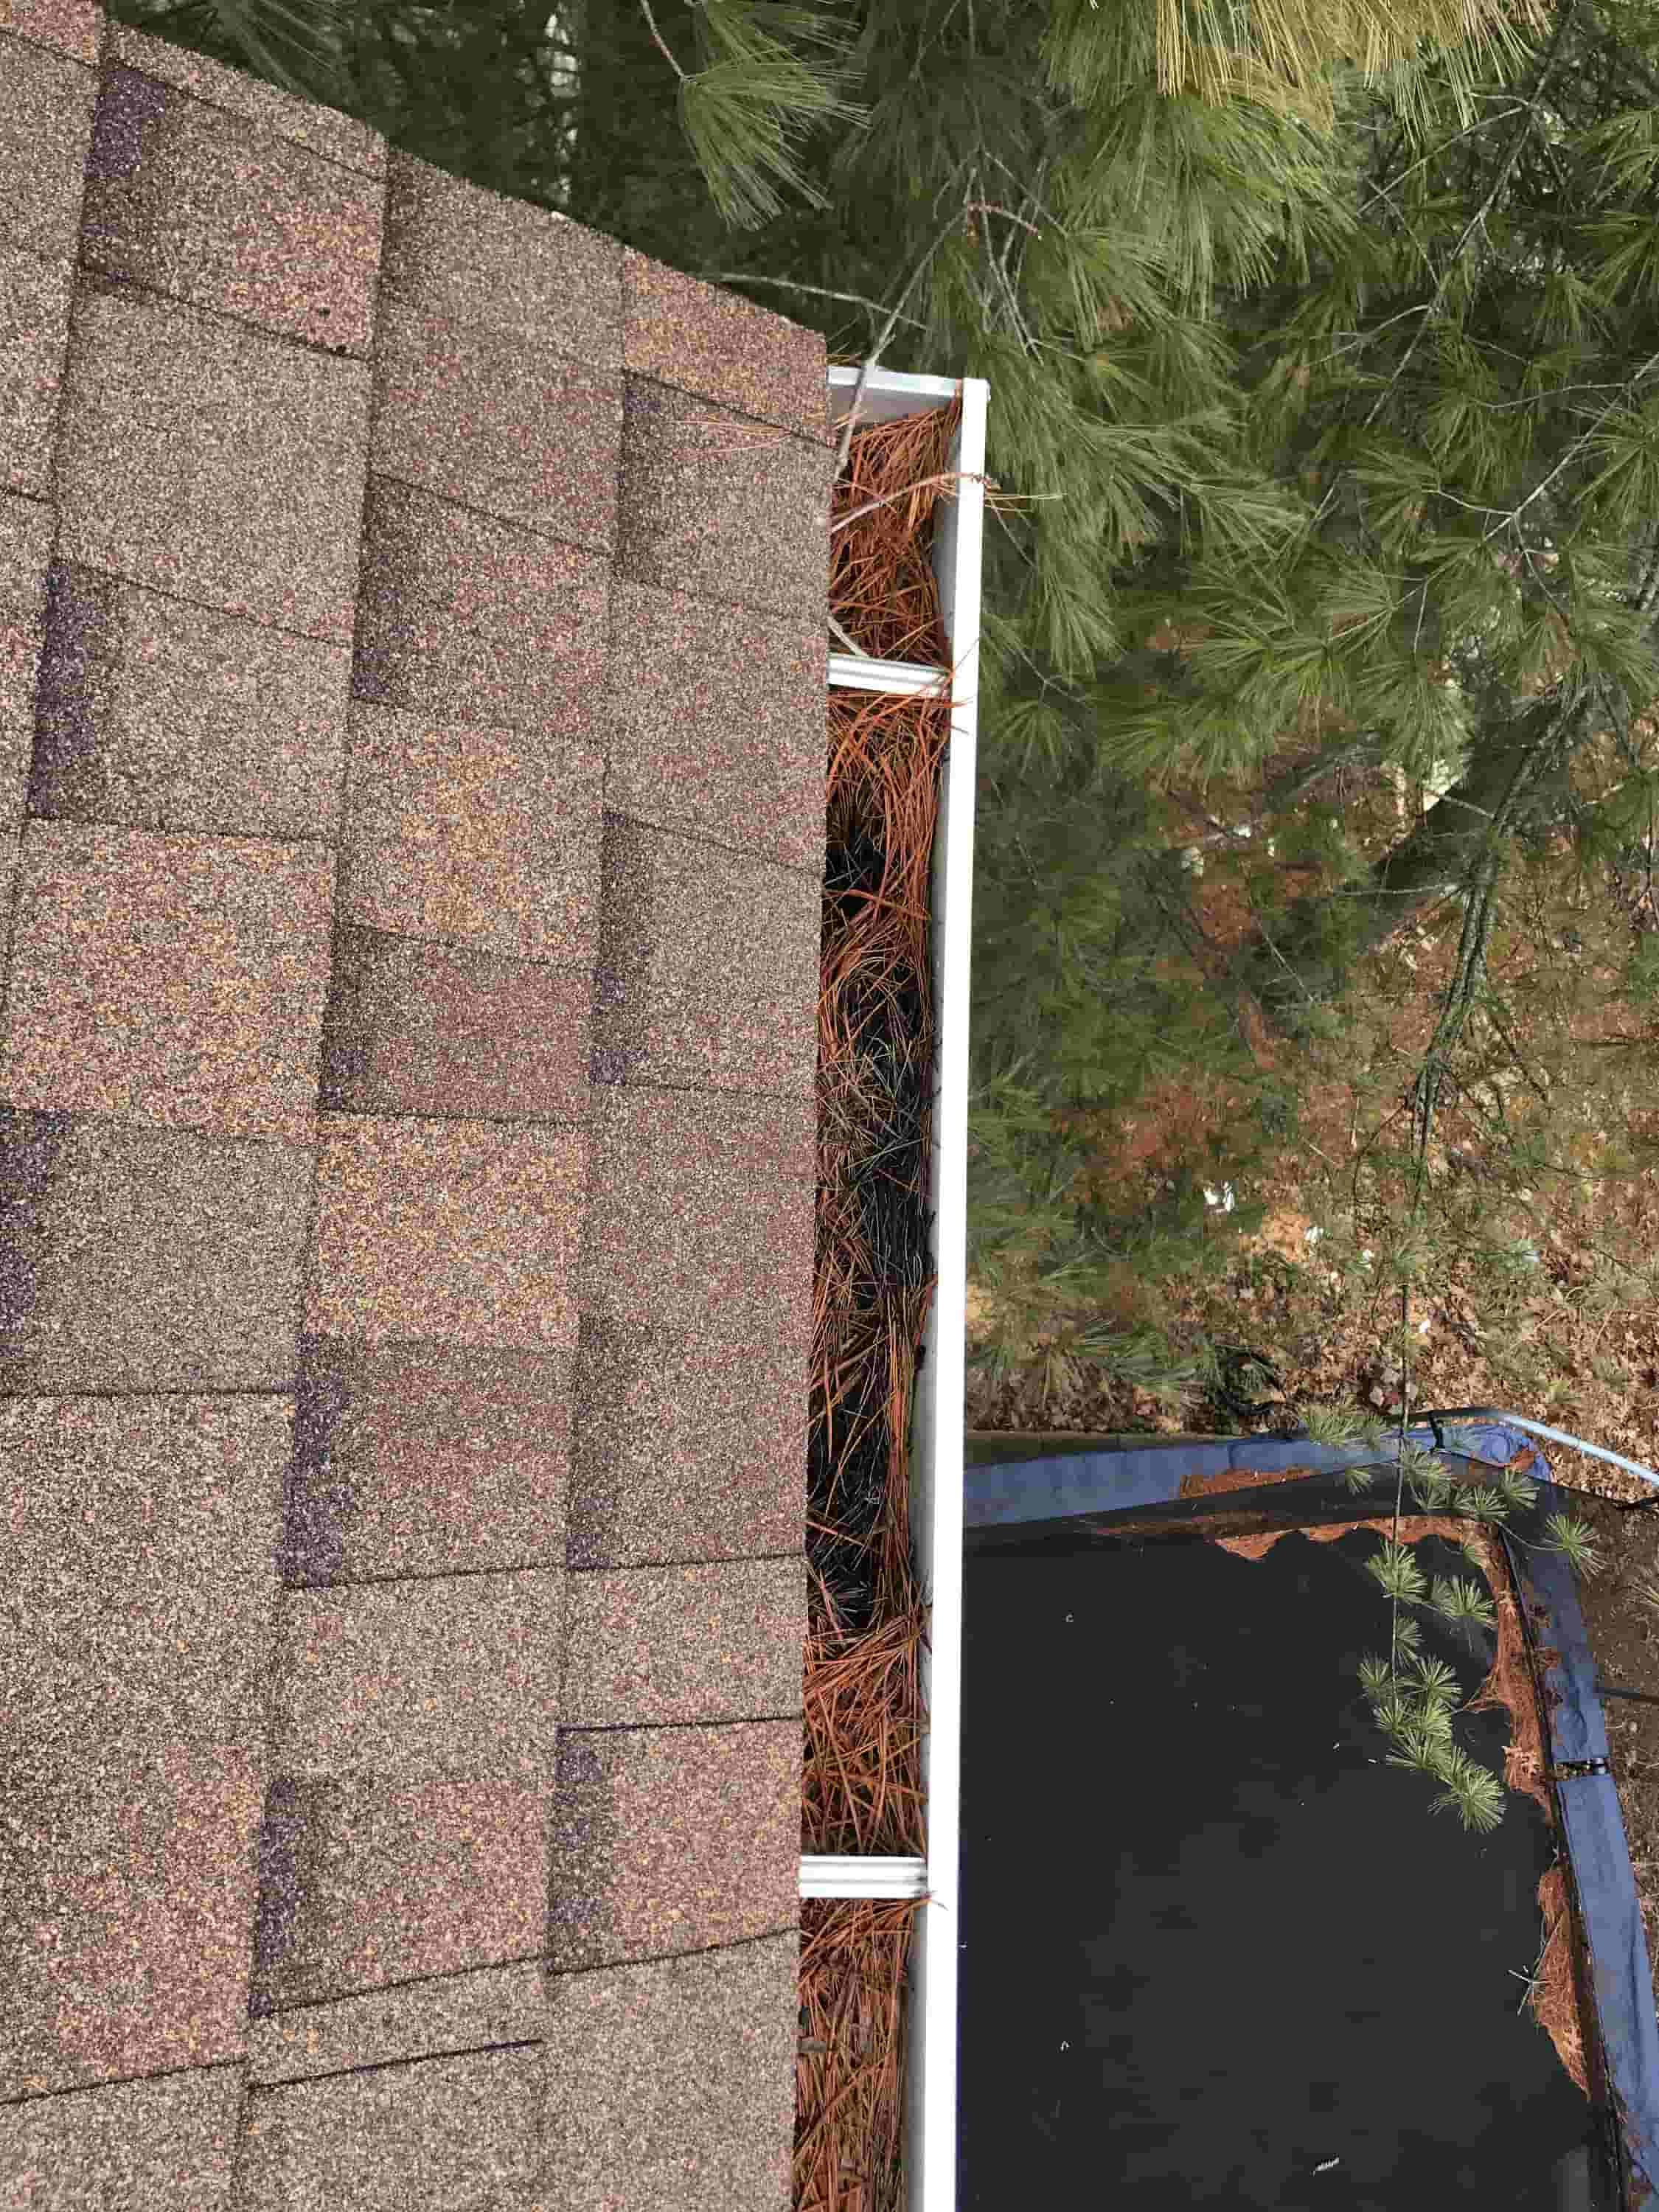 cleaning outside of gutters